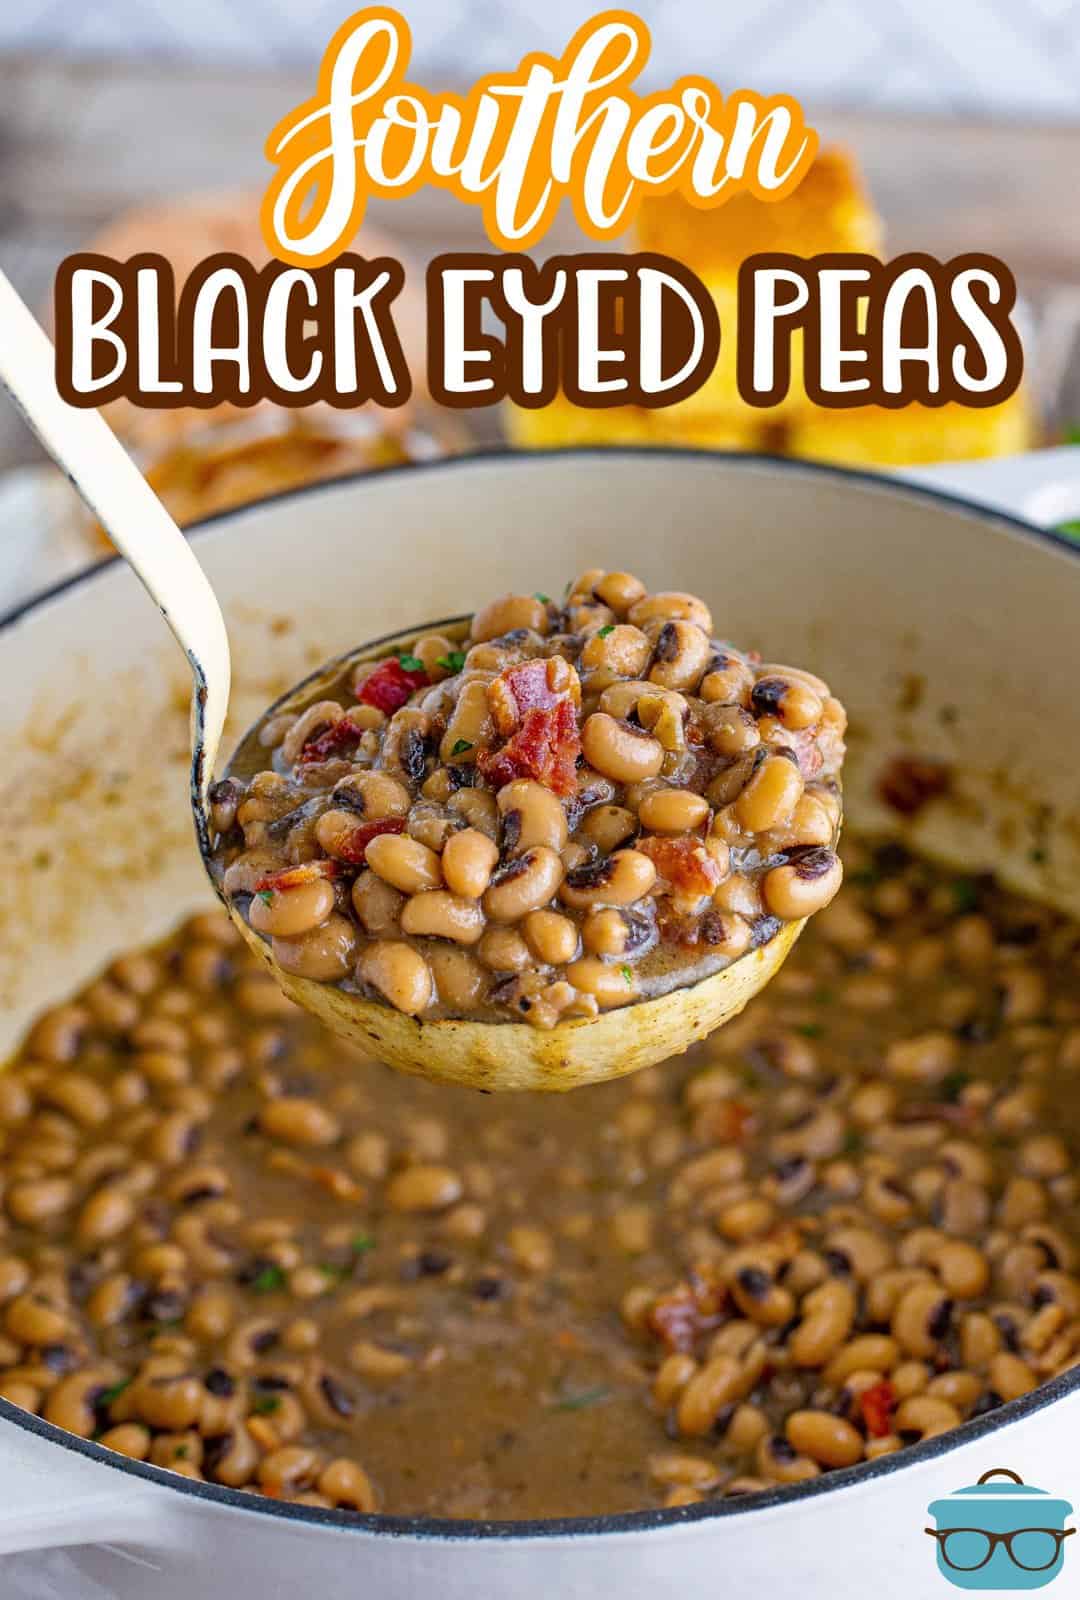 Pinterest image of ladle holding up some of the Southern Black Eyed Peas.